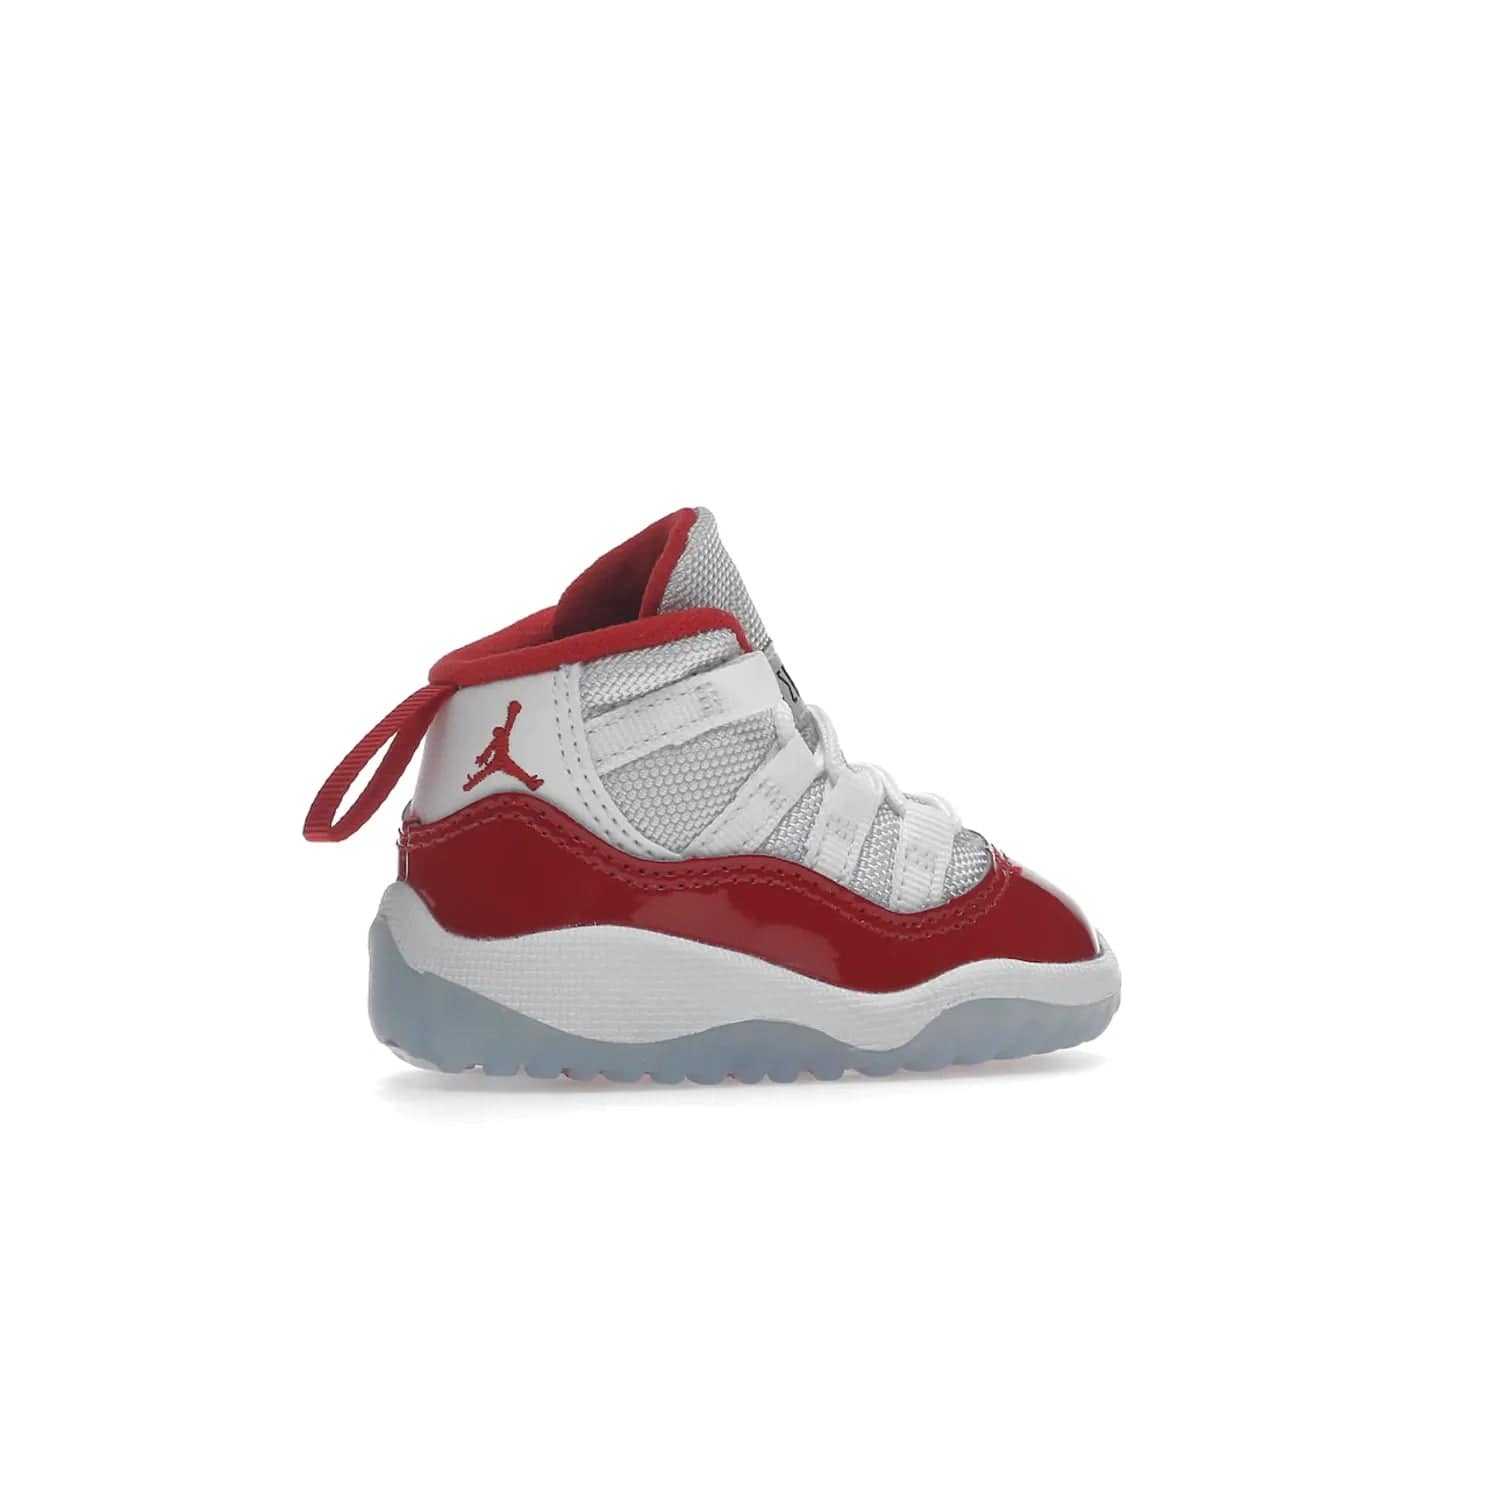 Jordan 11 Retro Cherry (2022) (TD) - Image 35 - Only at www.BallersClubKickz.com - Timeless classic. Air Jordan 11 Retro Cherry 2022 TD combines mesh, leather & suede for a unique look. White upper with varsity red suede. Jumpman logo on collar & tongue. Available Dec 10th, priced at $80.